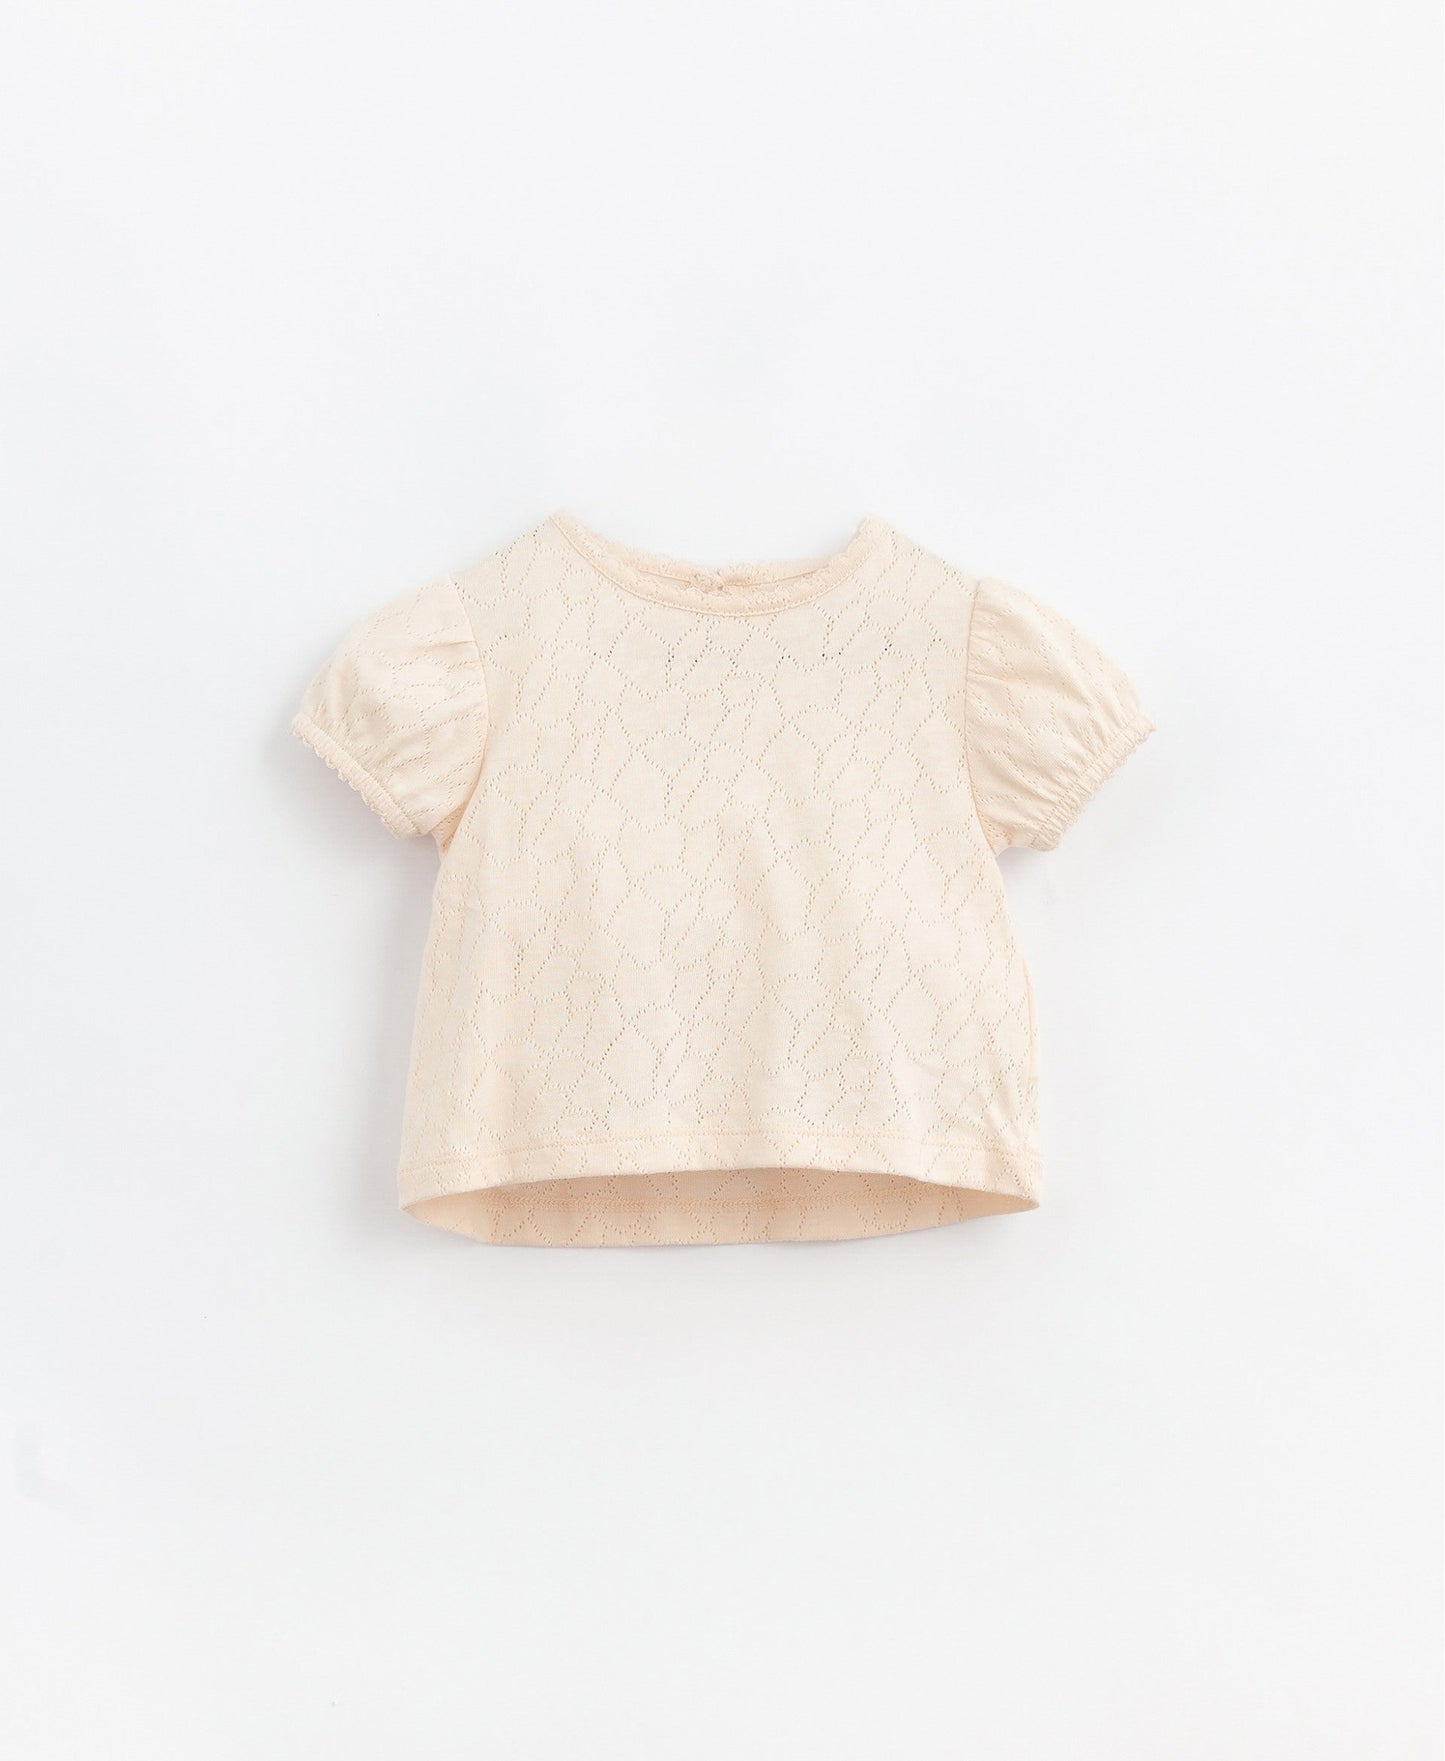 Play Up - T-shirt in ajour pattern | Basketry